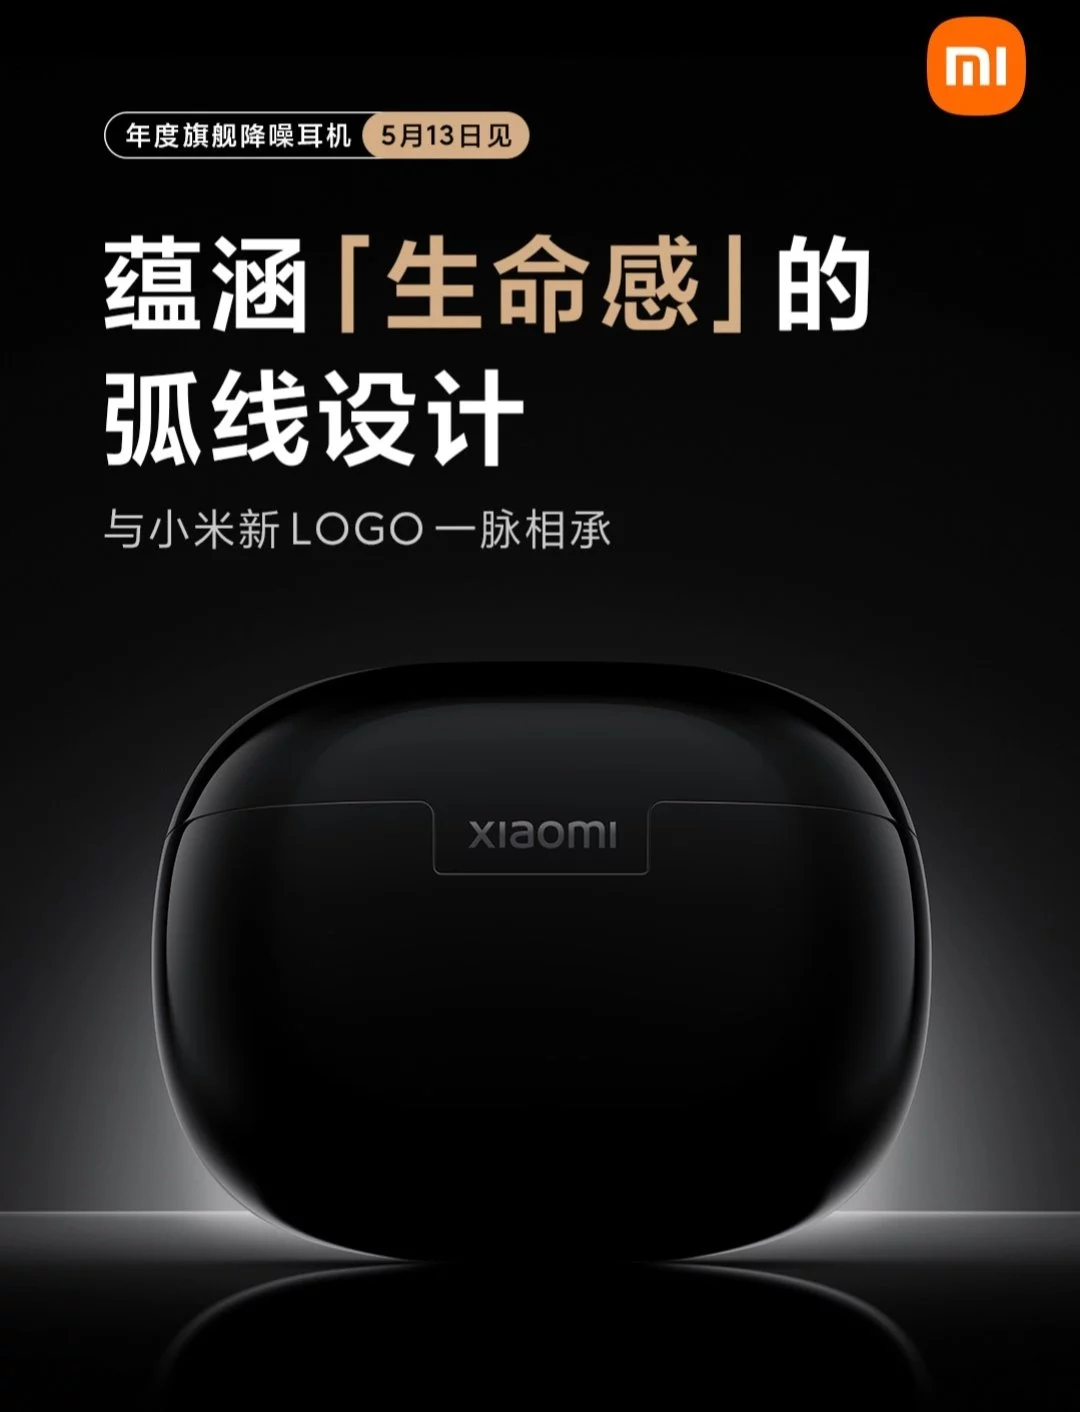 Xiaomi TWS earbuds with ANC support launching on May 13 2021 in China